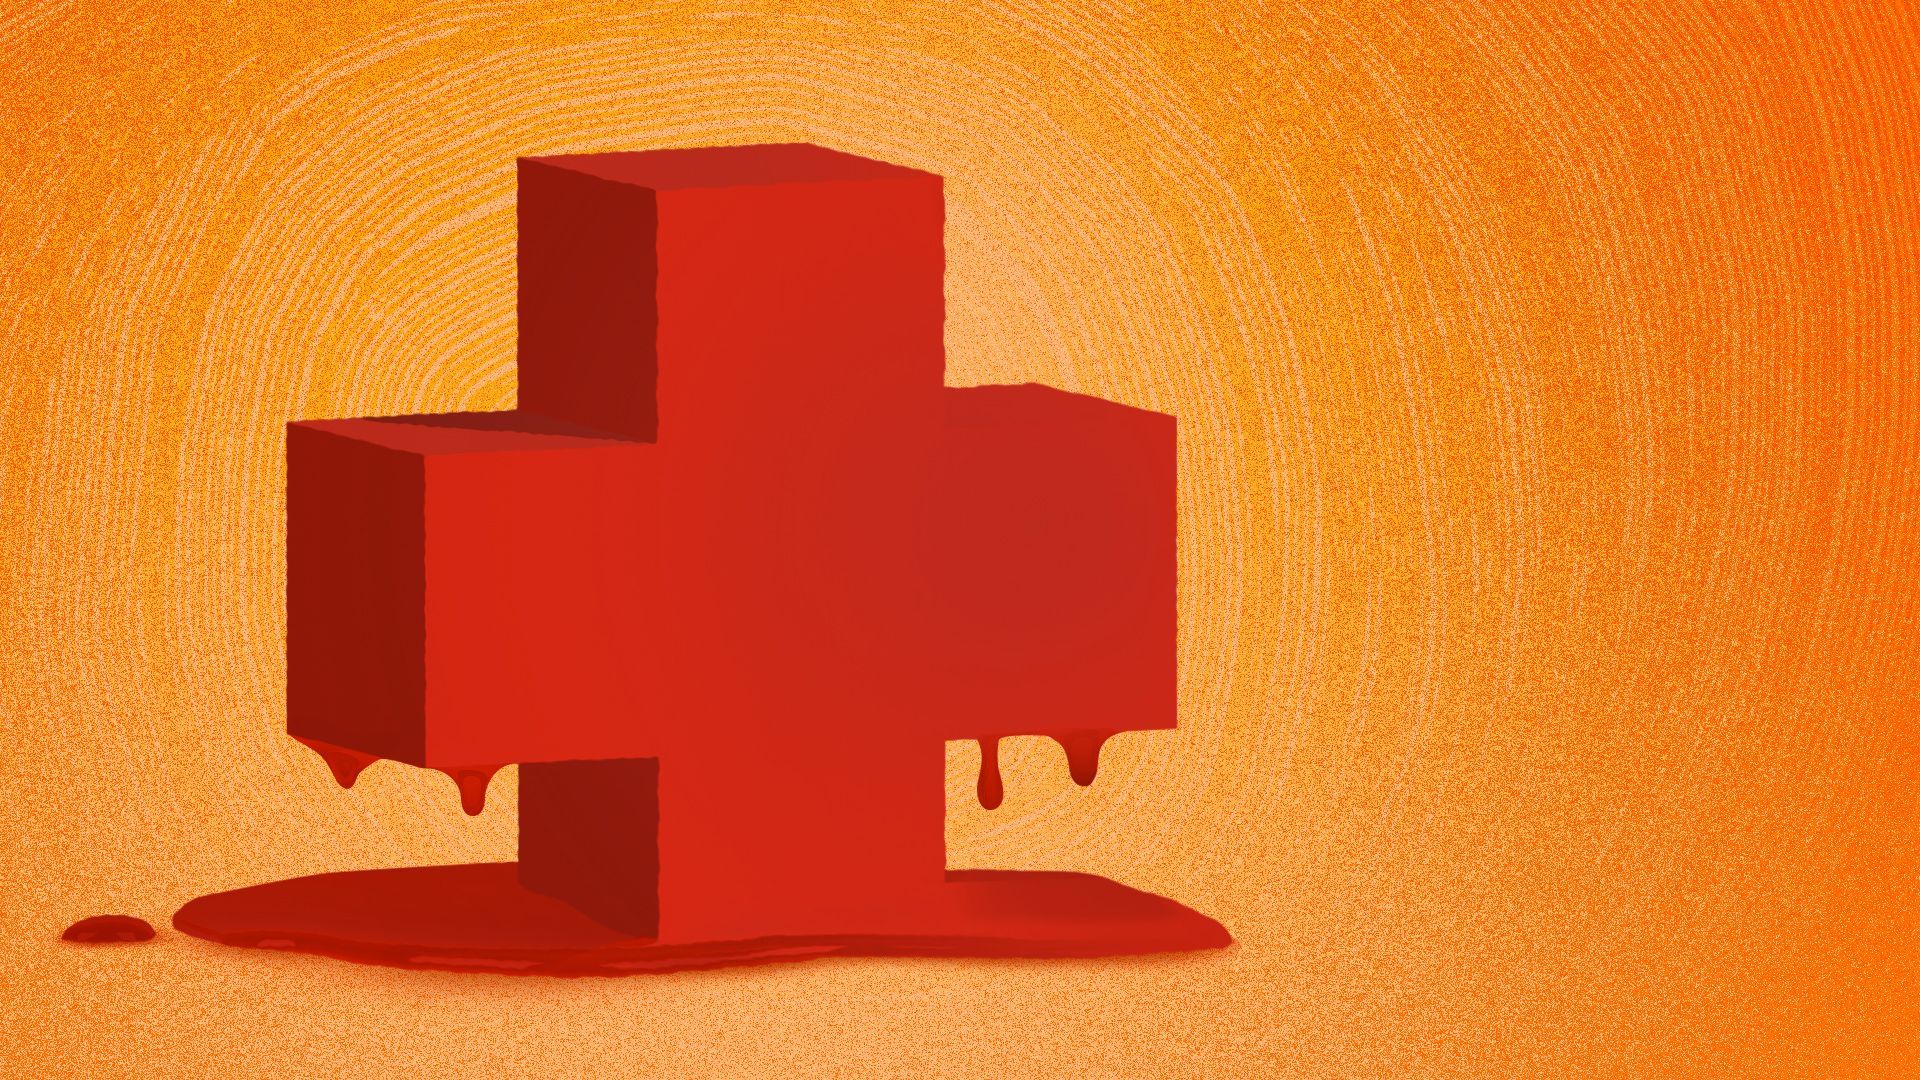 Illustration of a 3D health cross shape dripping and melting from heat.